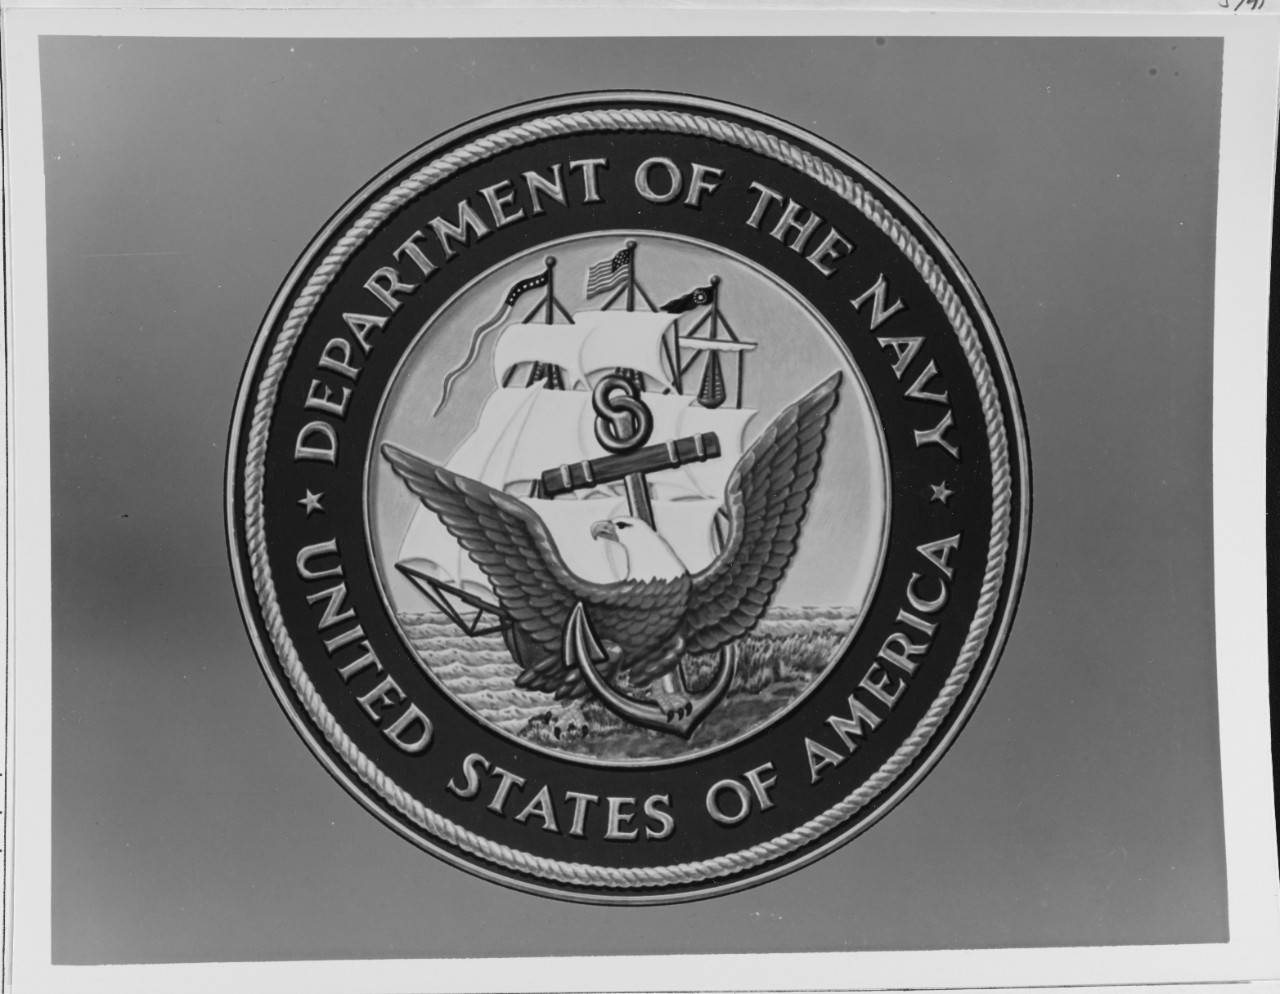 Insignia: Department of the Navy